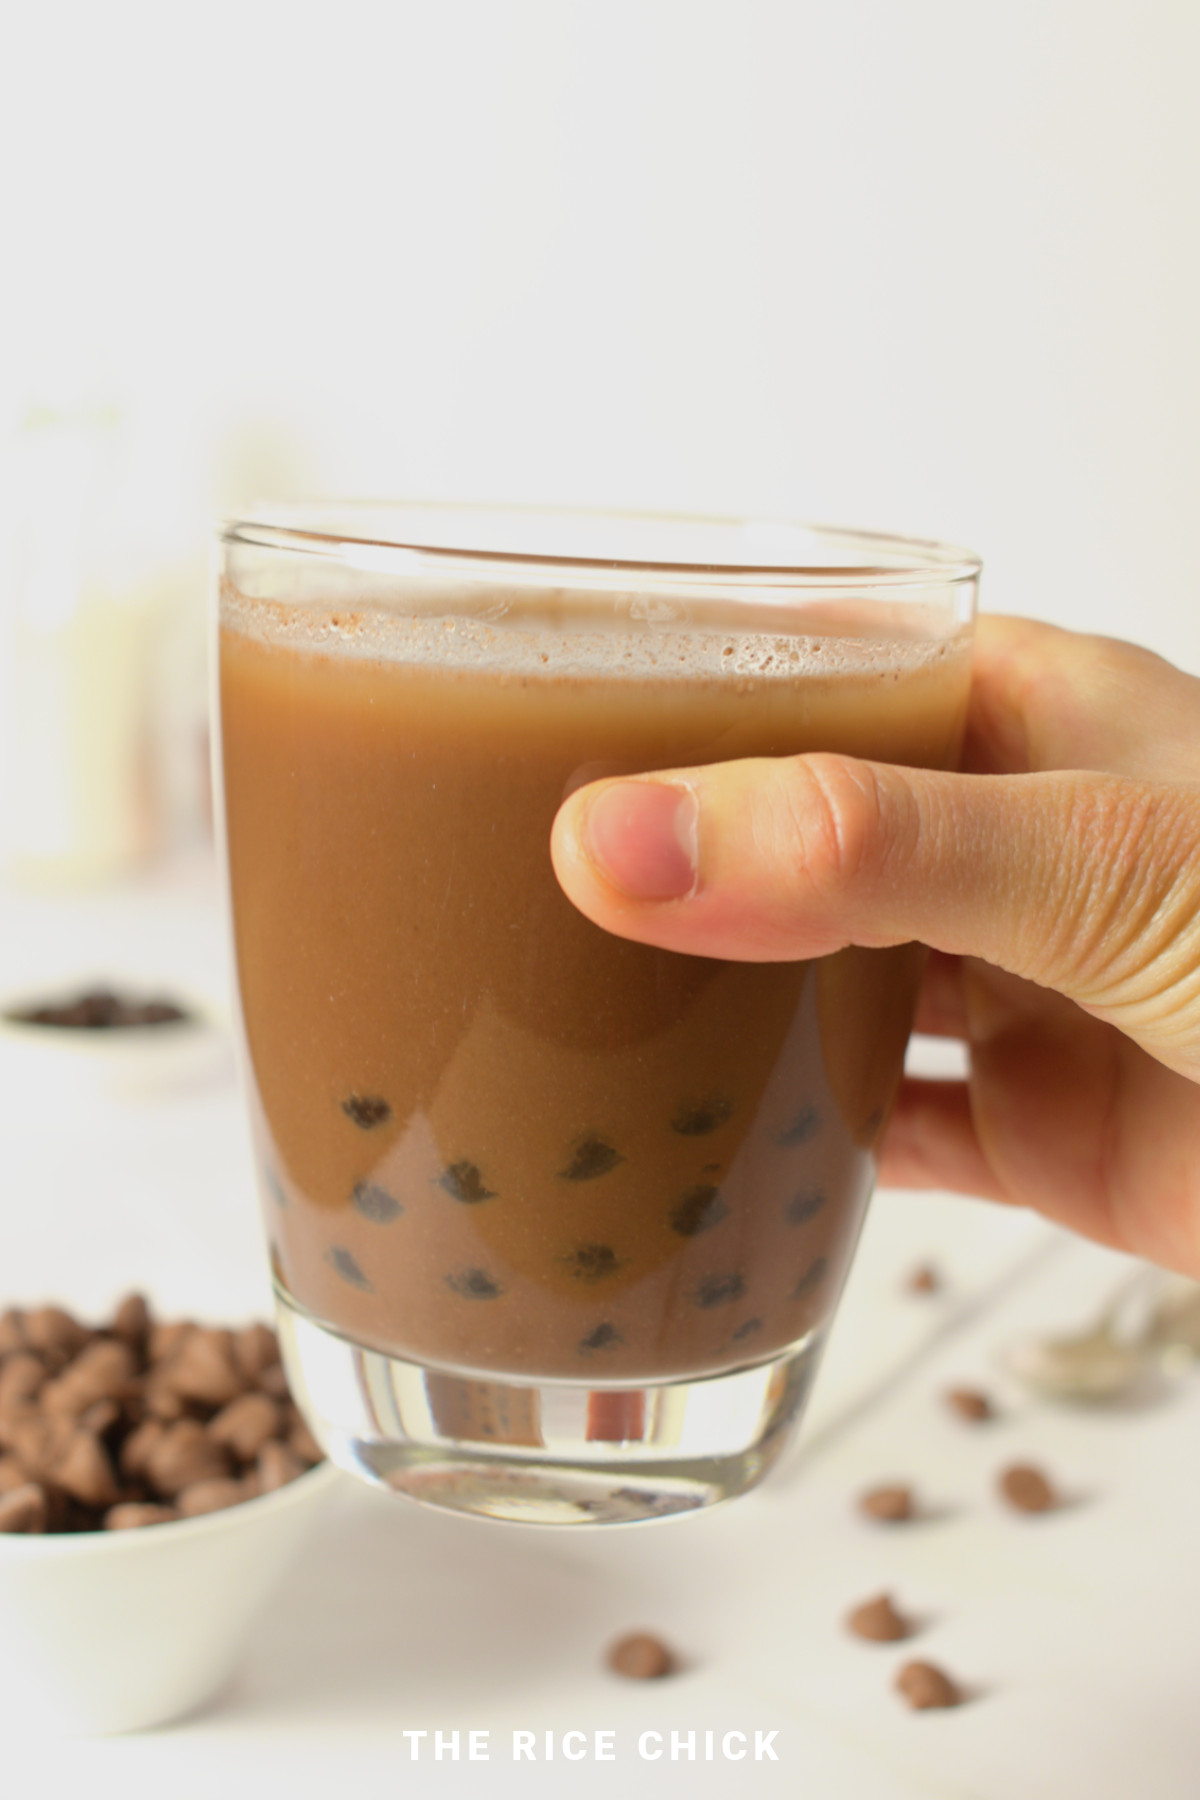 Glass of chocolate milk tea being held in a hand.